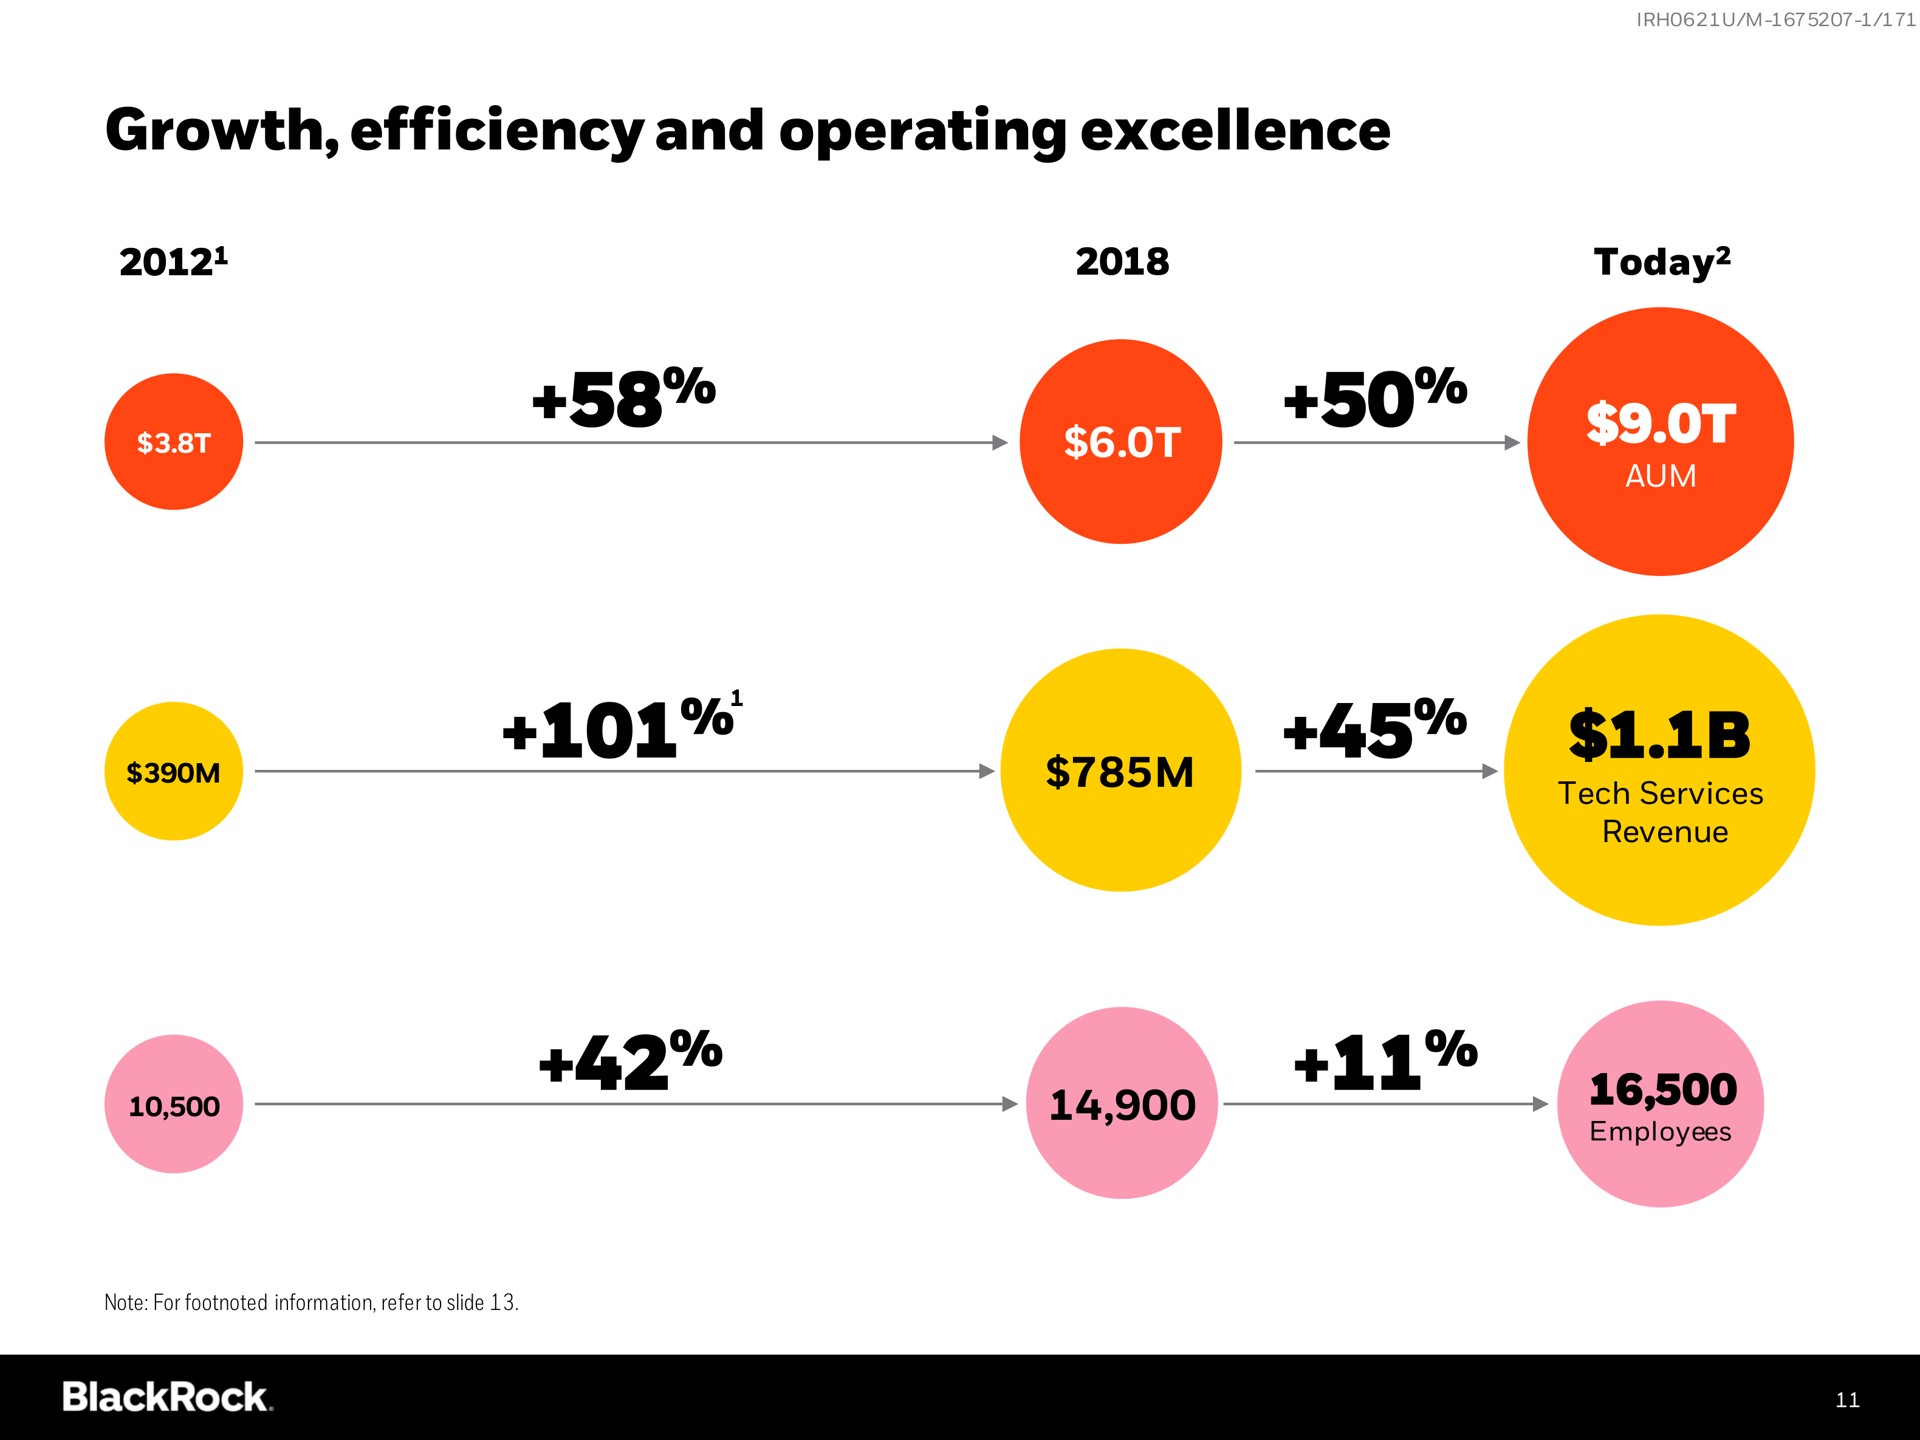 growth efficiency and operating excellence today | BlackRock